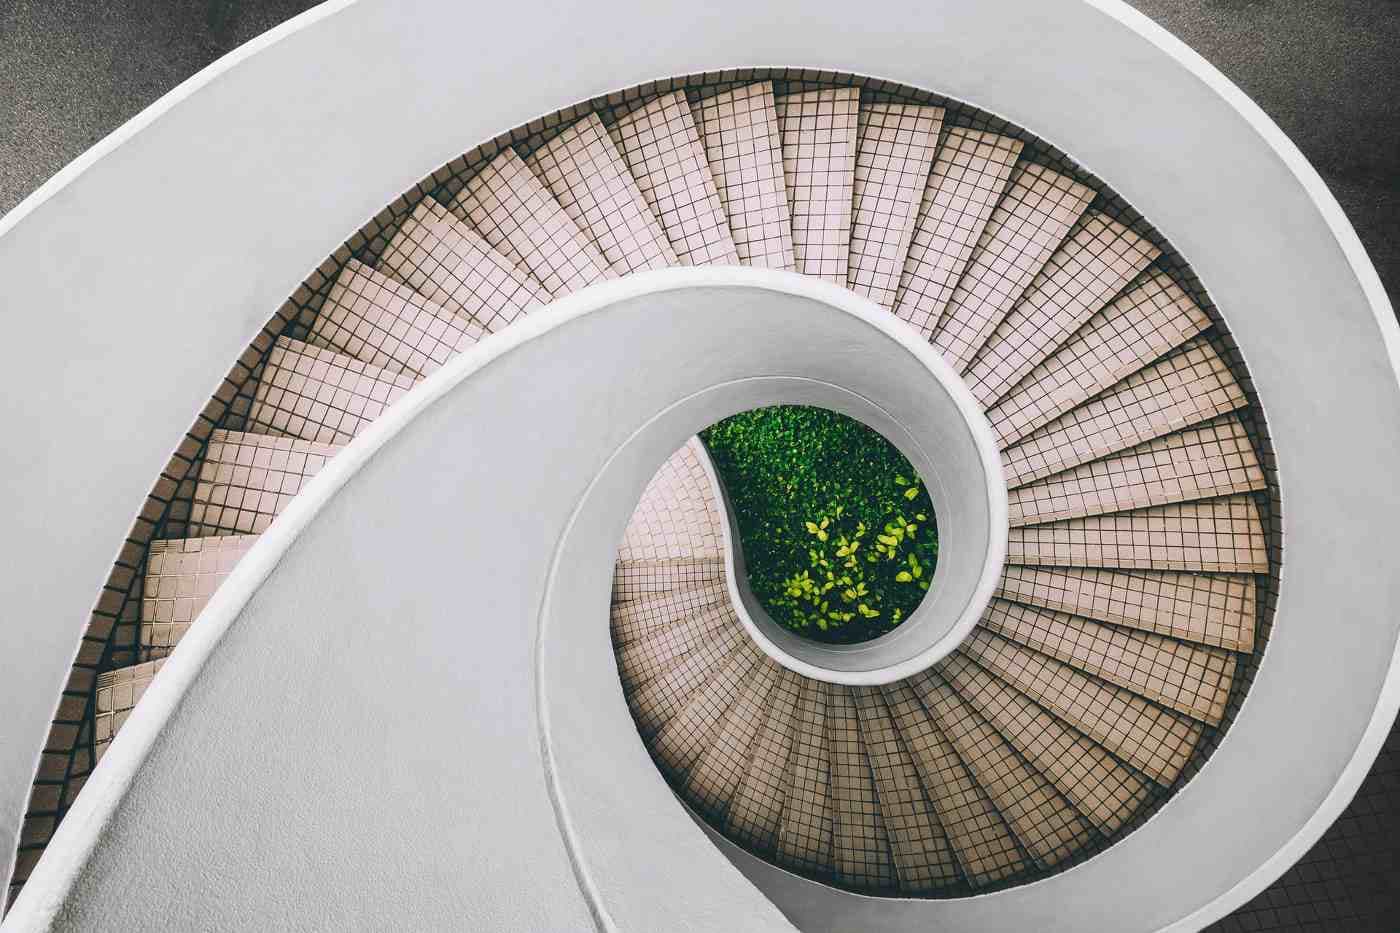 spiral-staircase-with-greenery-at-bottom-the-futuristic-world-of-living-building-materials